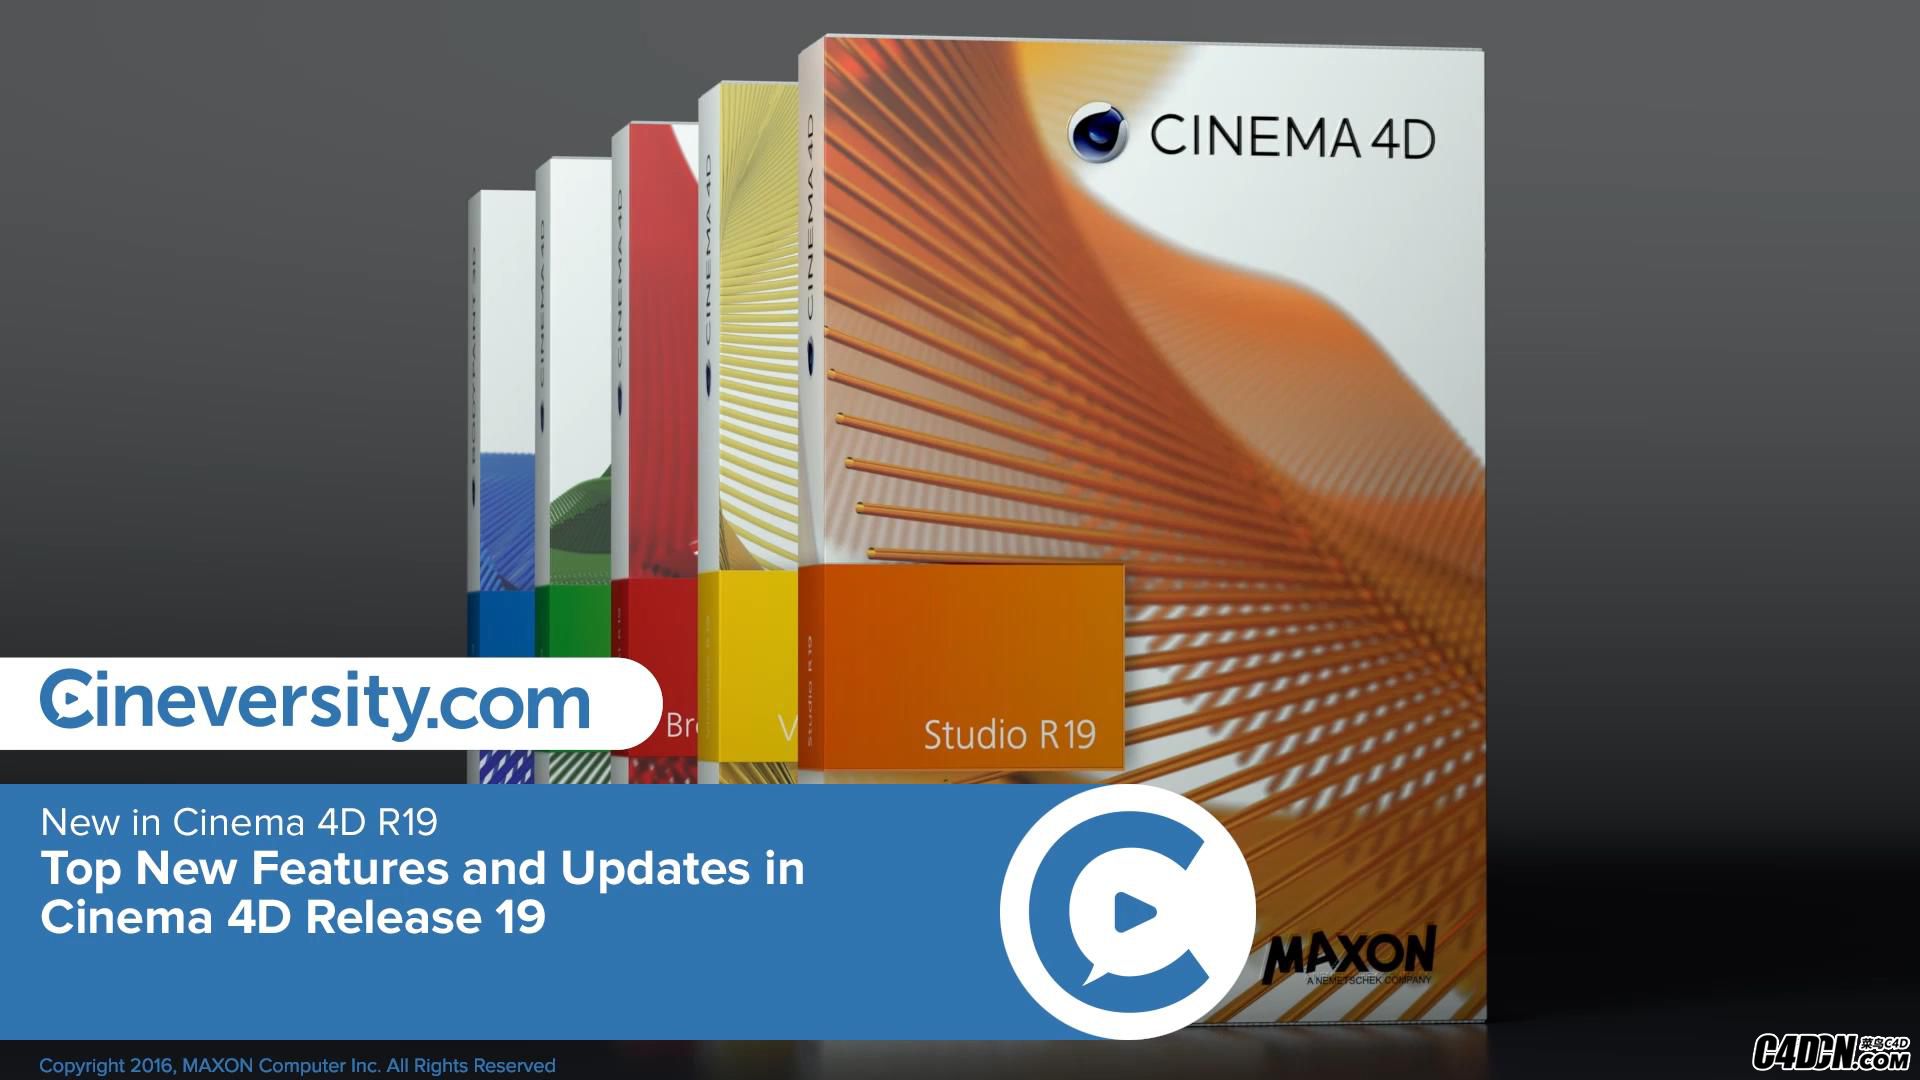 01-New in Cinema 4D R19 Top New Features and Updates in Cinema 4D Release 19_201.jpg